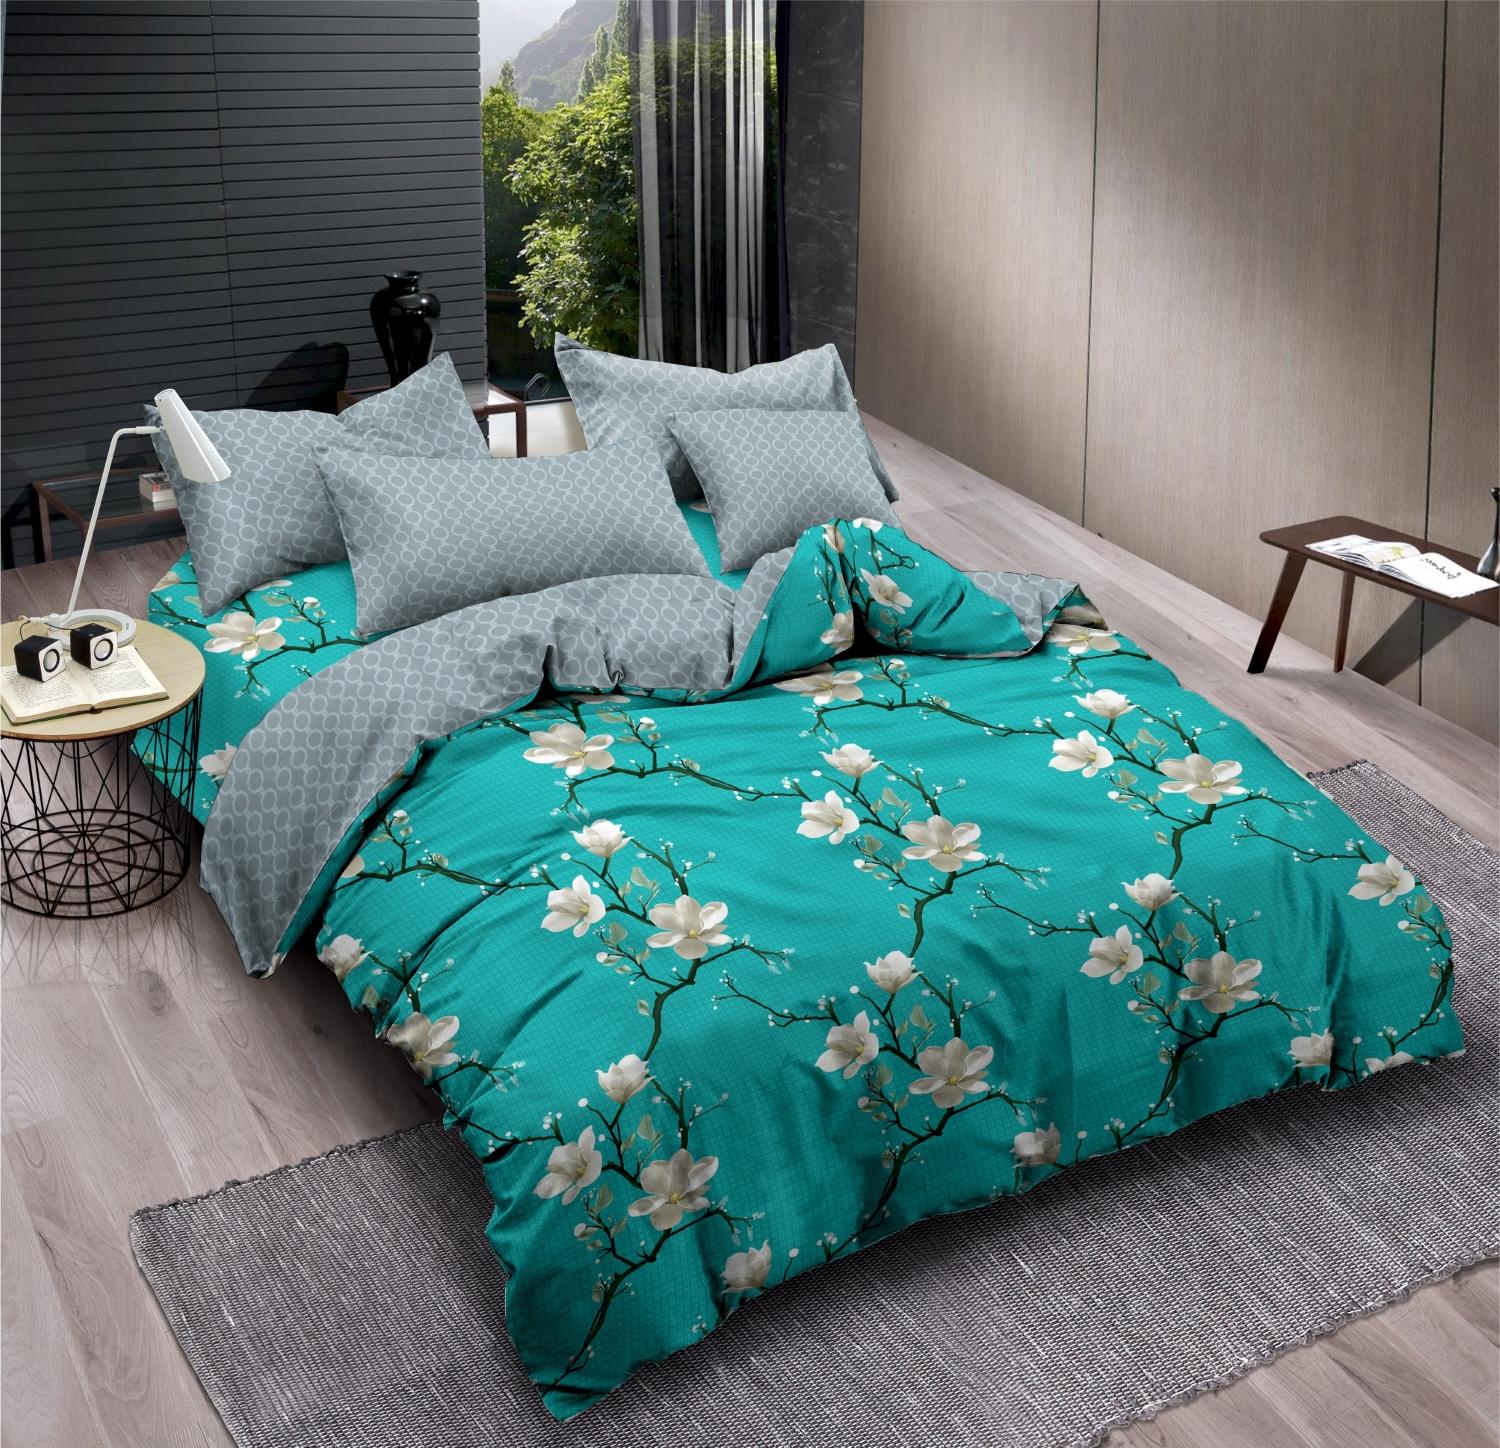 Harga Laundry Bed Cover 2019